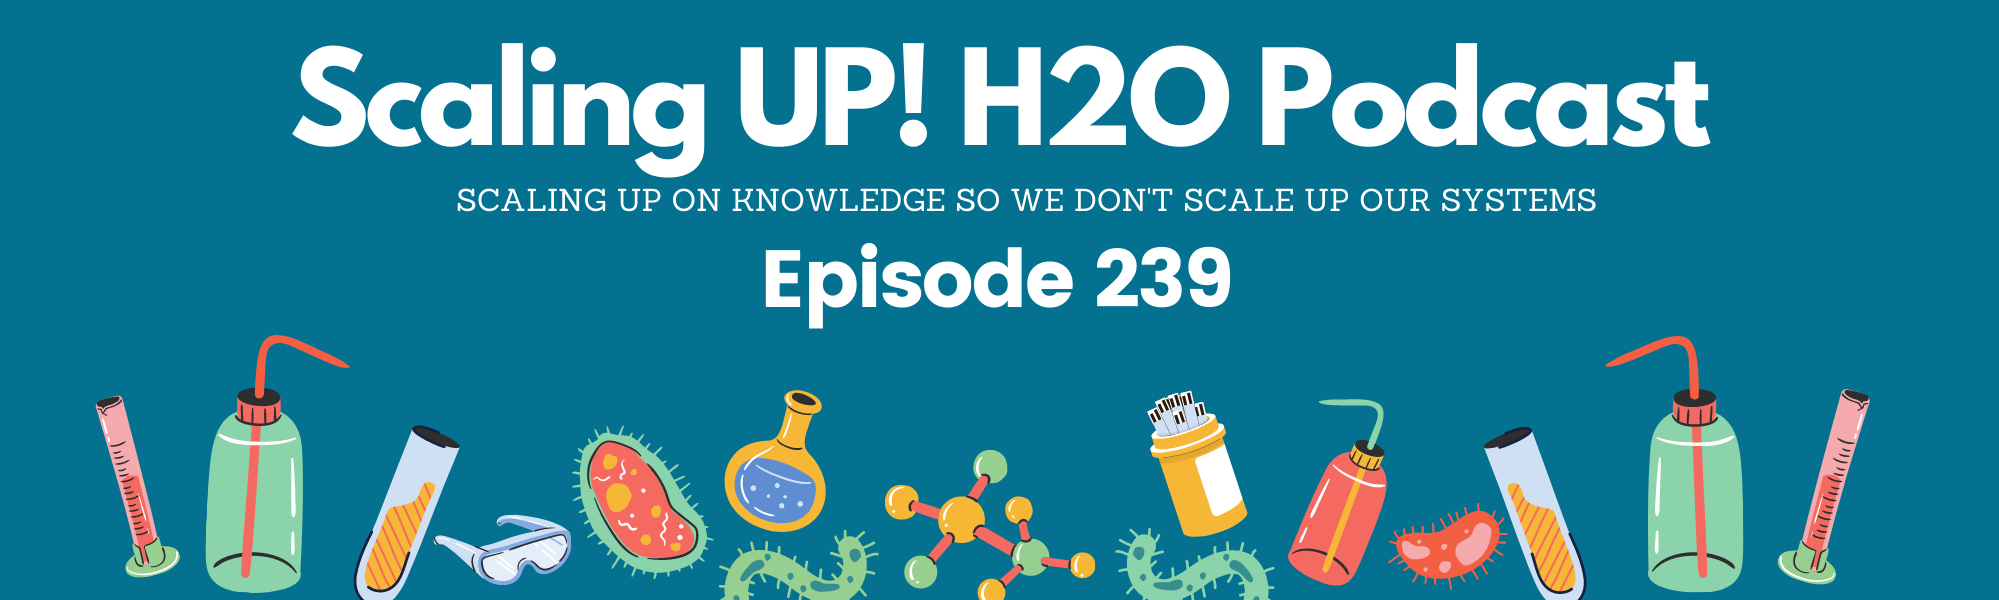 239 The One About Negotiating - Scaling UP! H2O